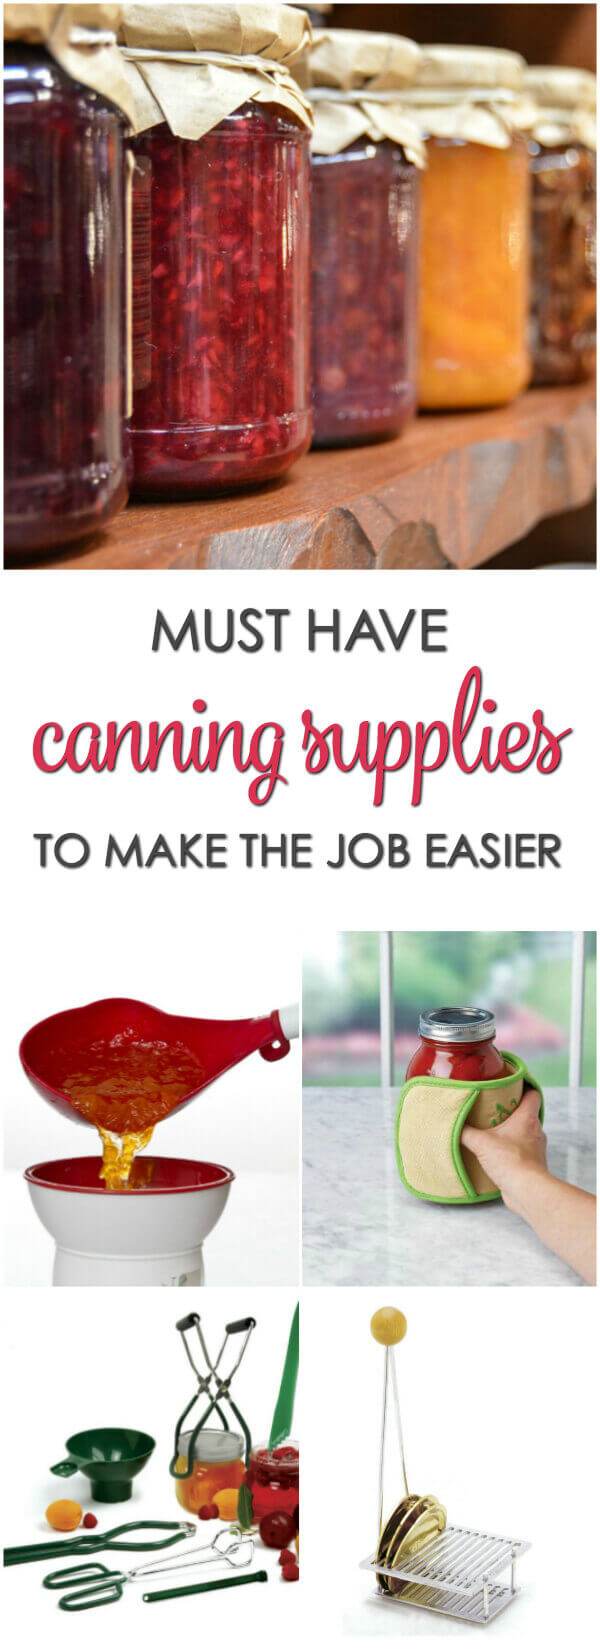 Must Have Home Canning Supplies - wondering where buy canning supplies?  Check out these Ball canning supplies and others.